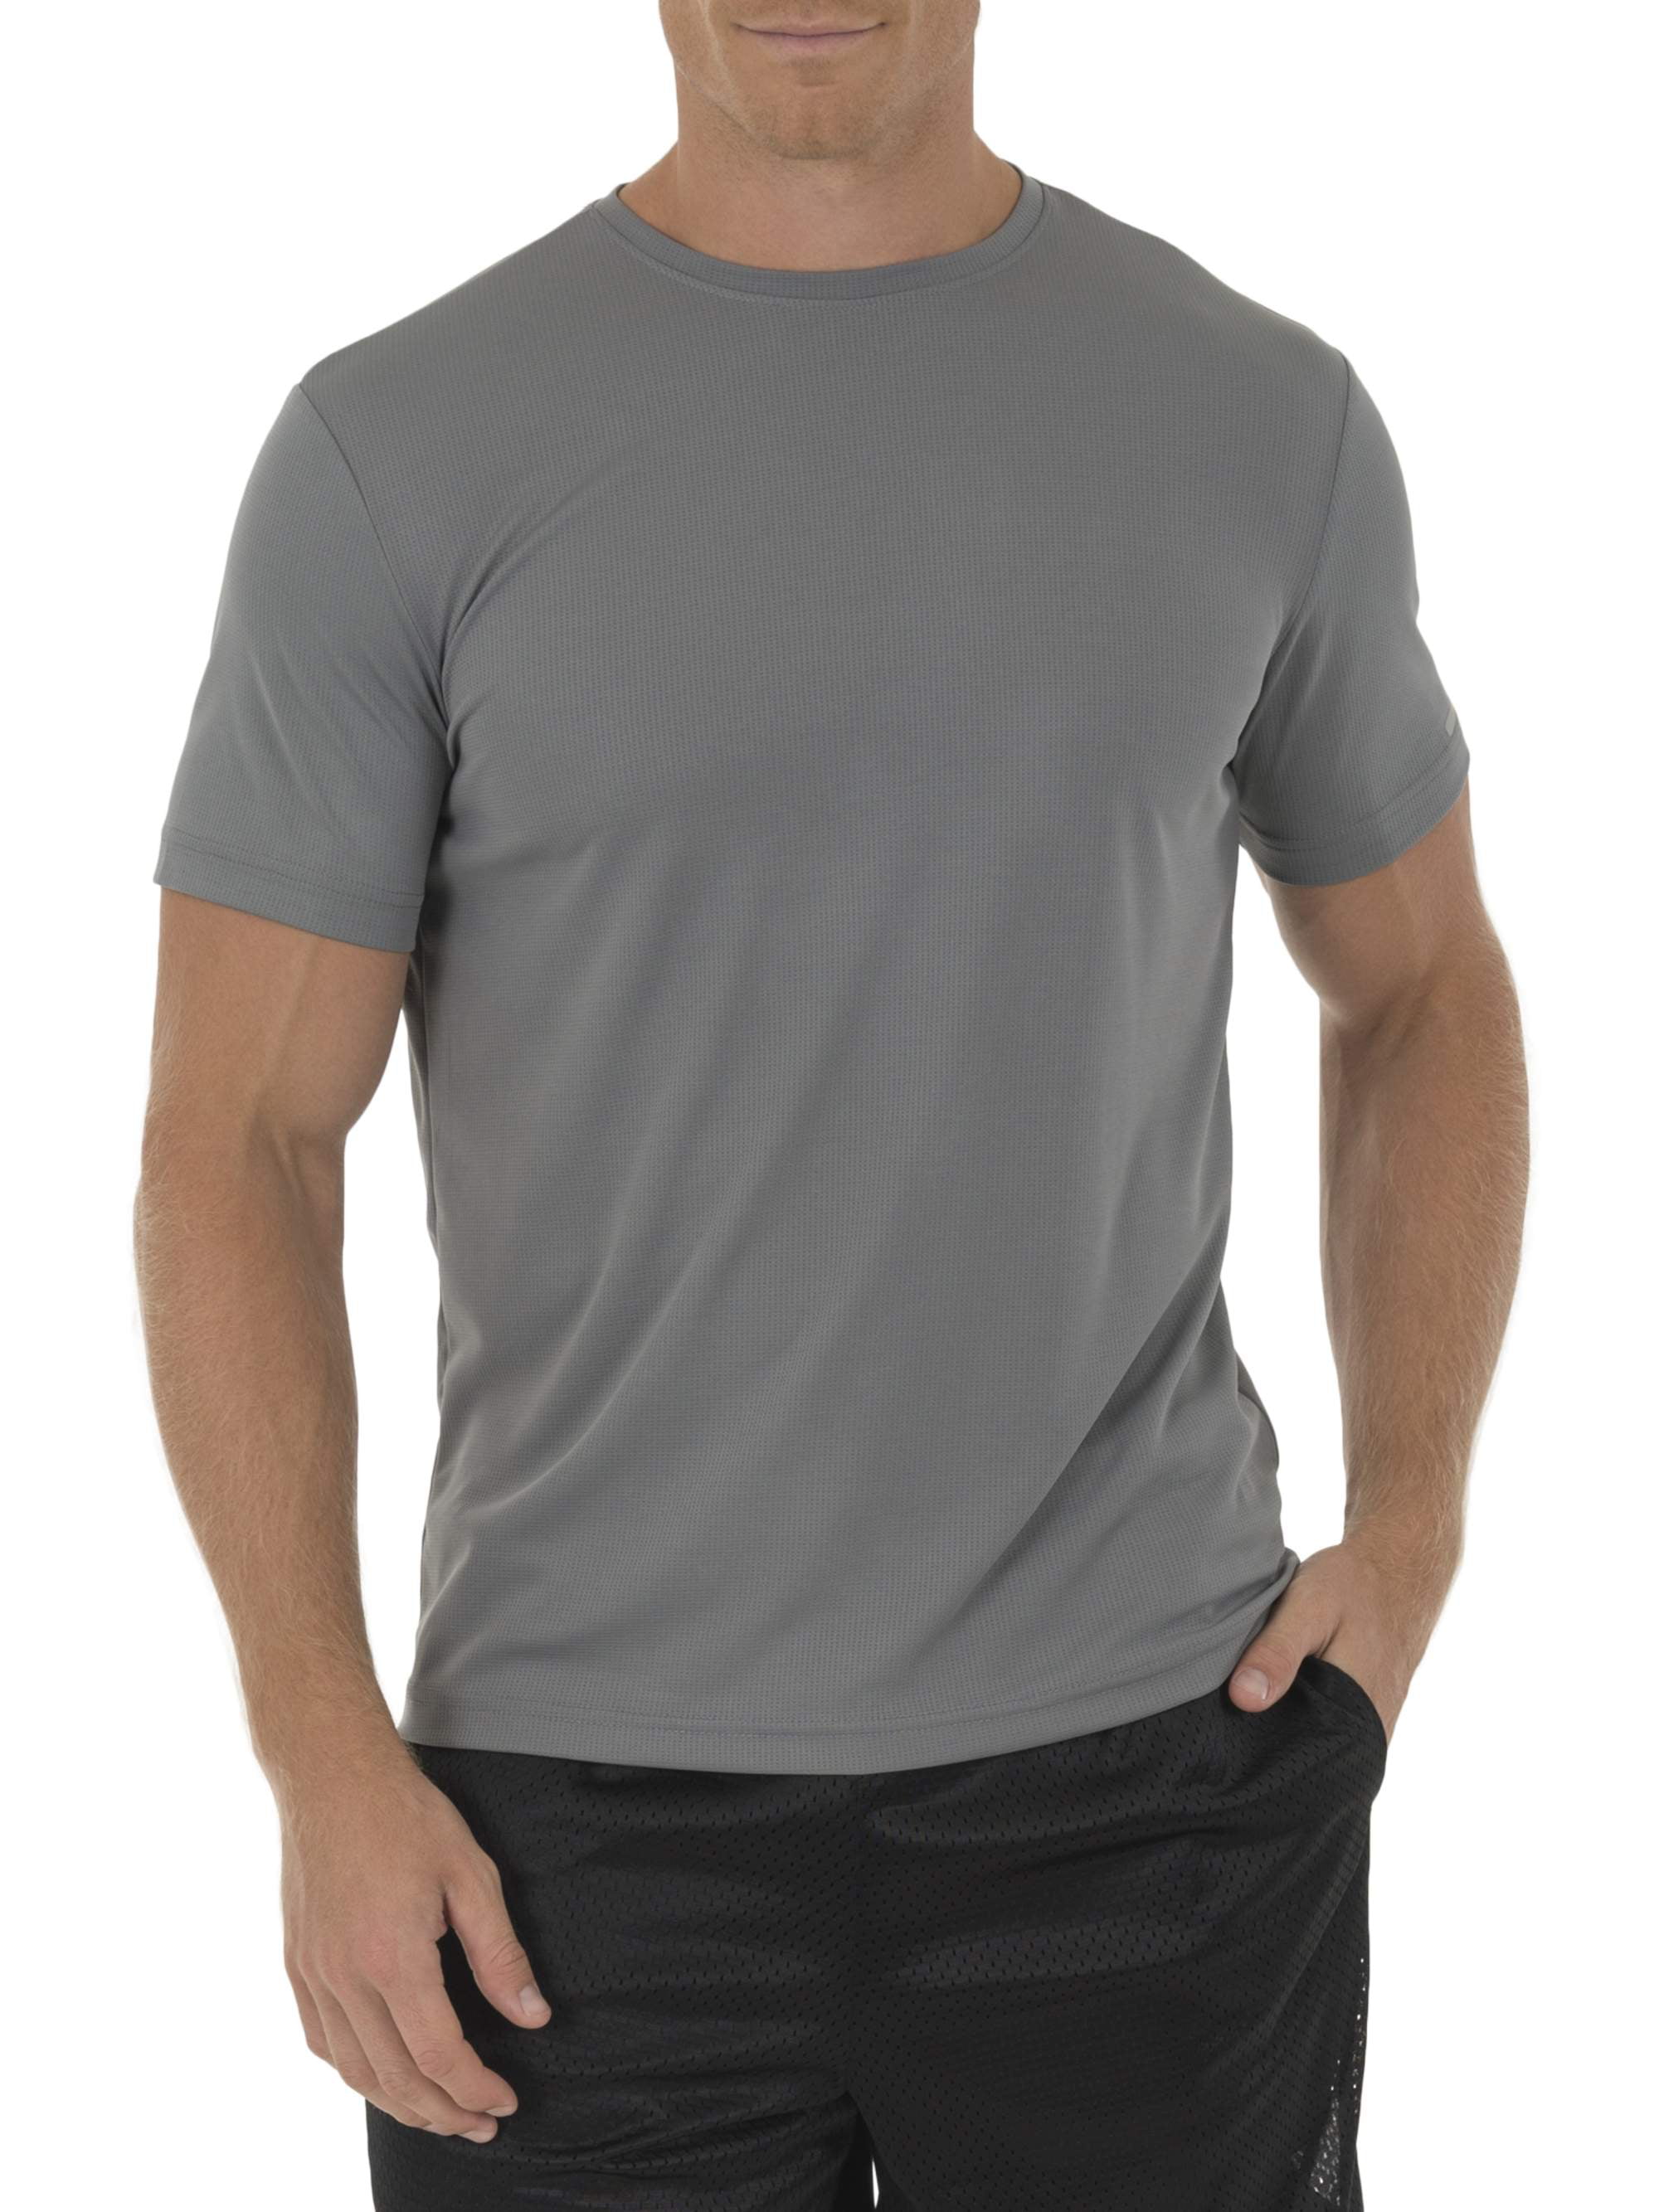 athletic works regular fit quick dry tee